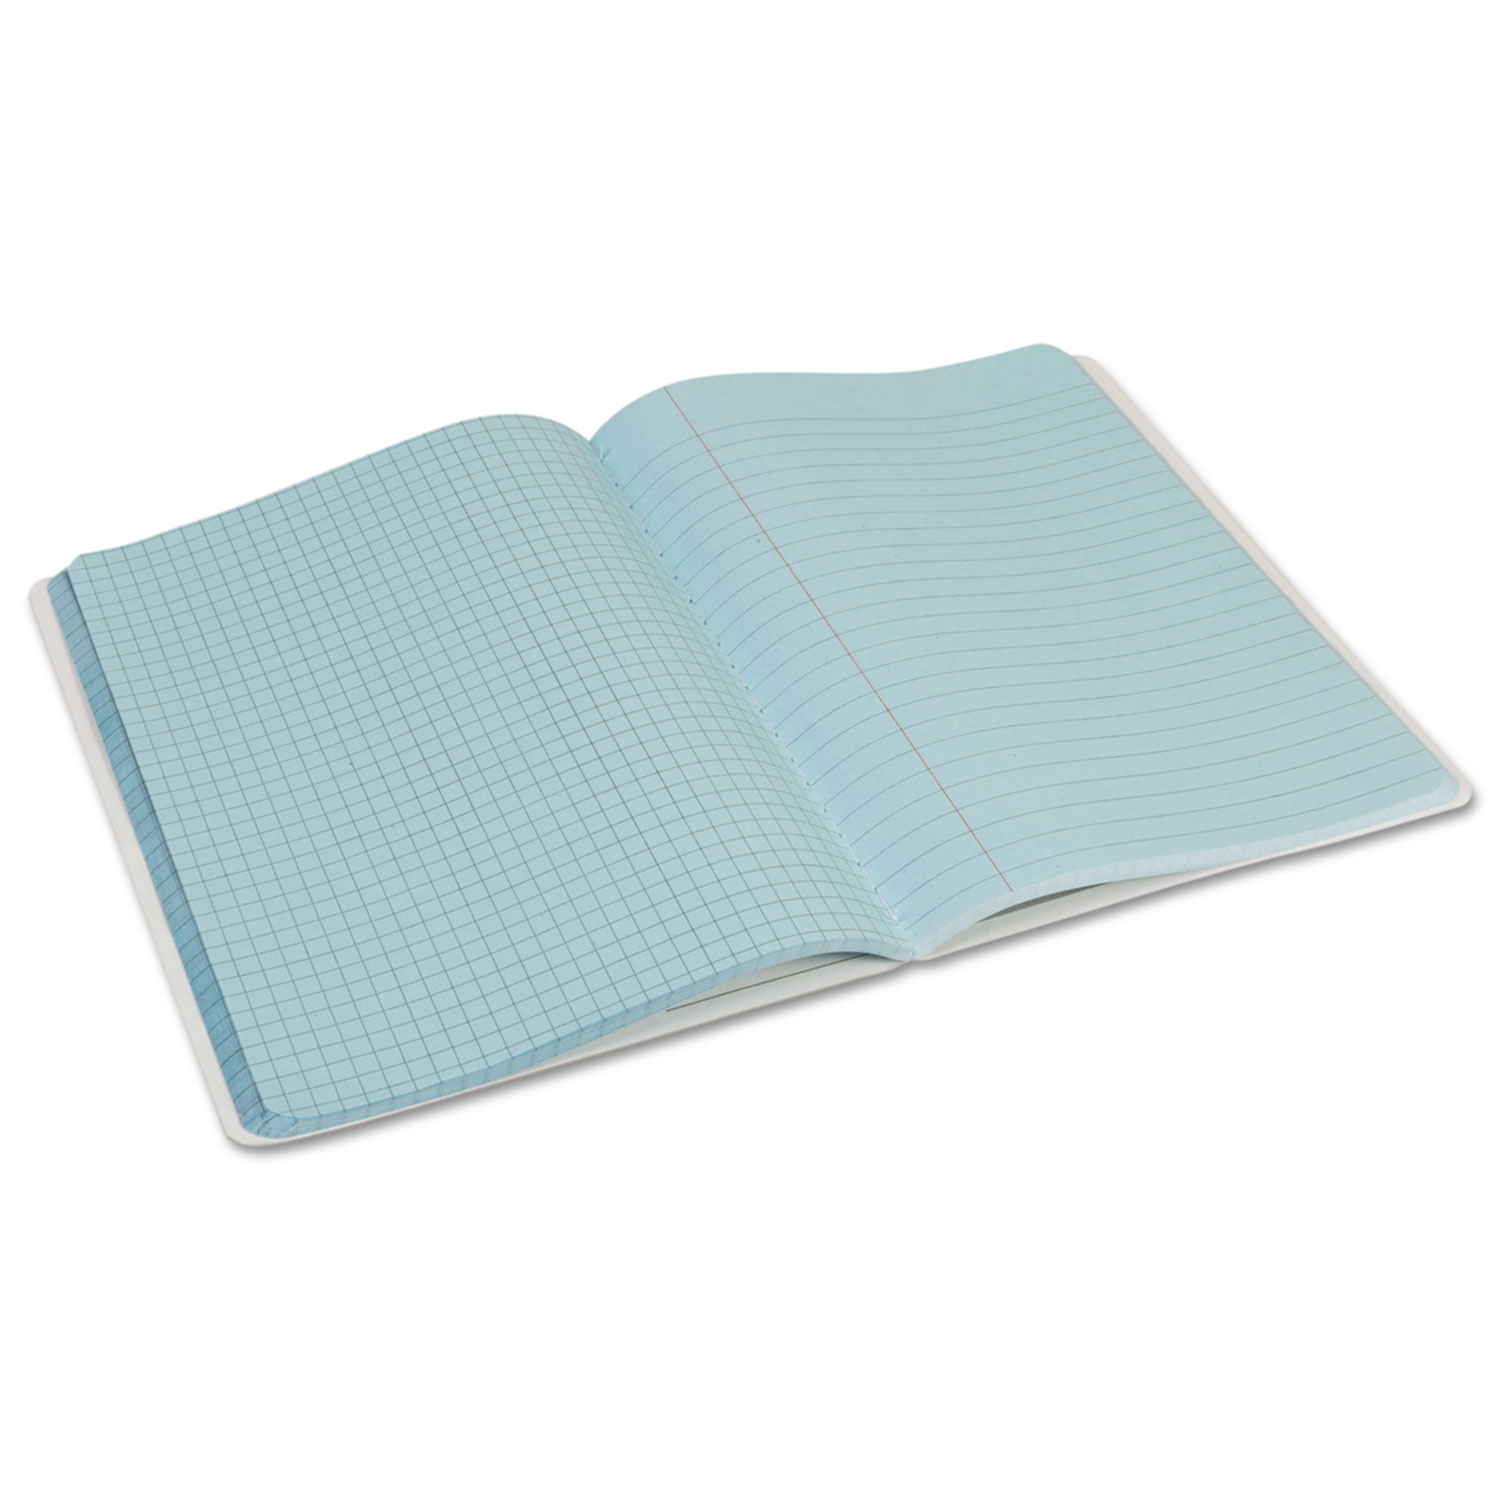  Pacon MMK37160 Composition Book, Narrow Rule, Blue Cover, 9.75 x 7.5, 200 Sheets (PACMMK37160) 